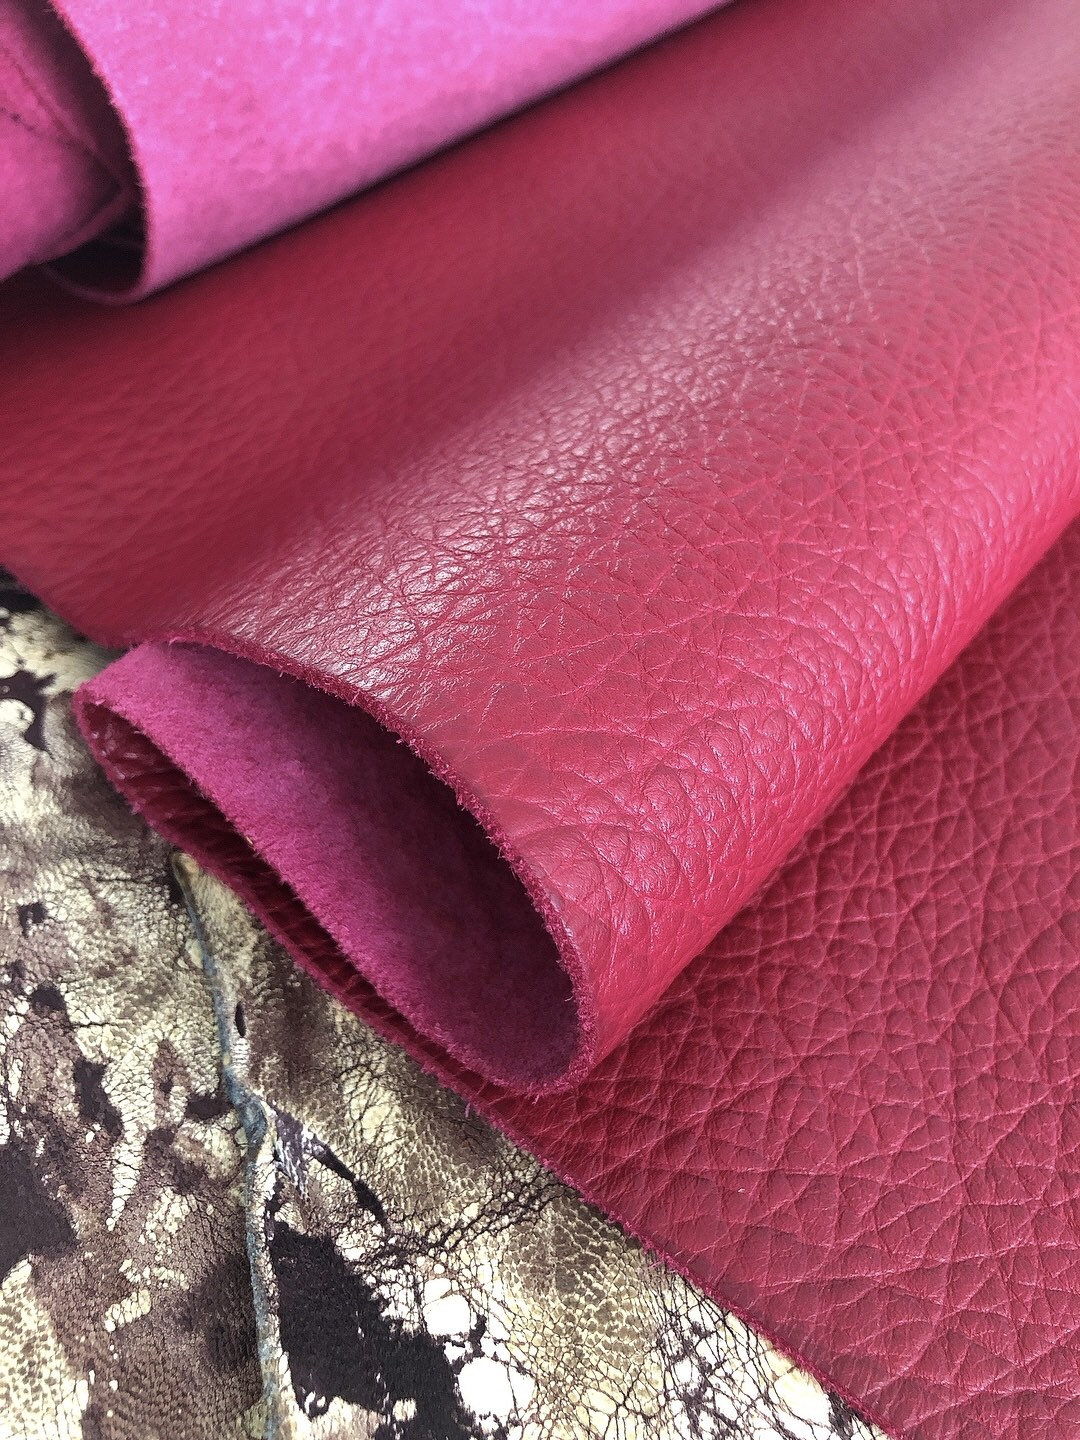 ITALIAN FUCHSIA COLOR Leather Sheets Natural Leather Pieces for